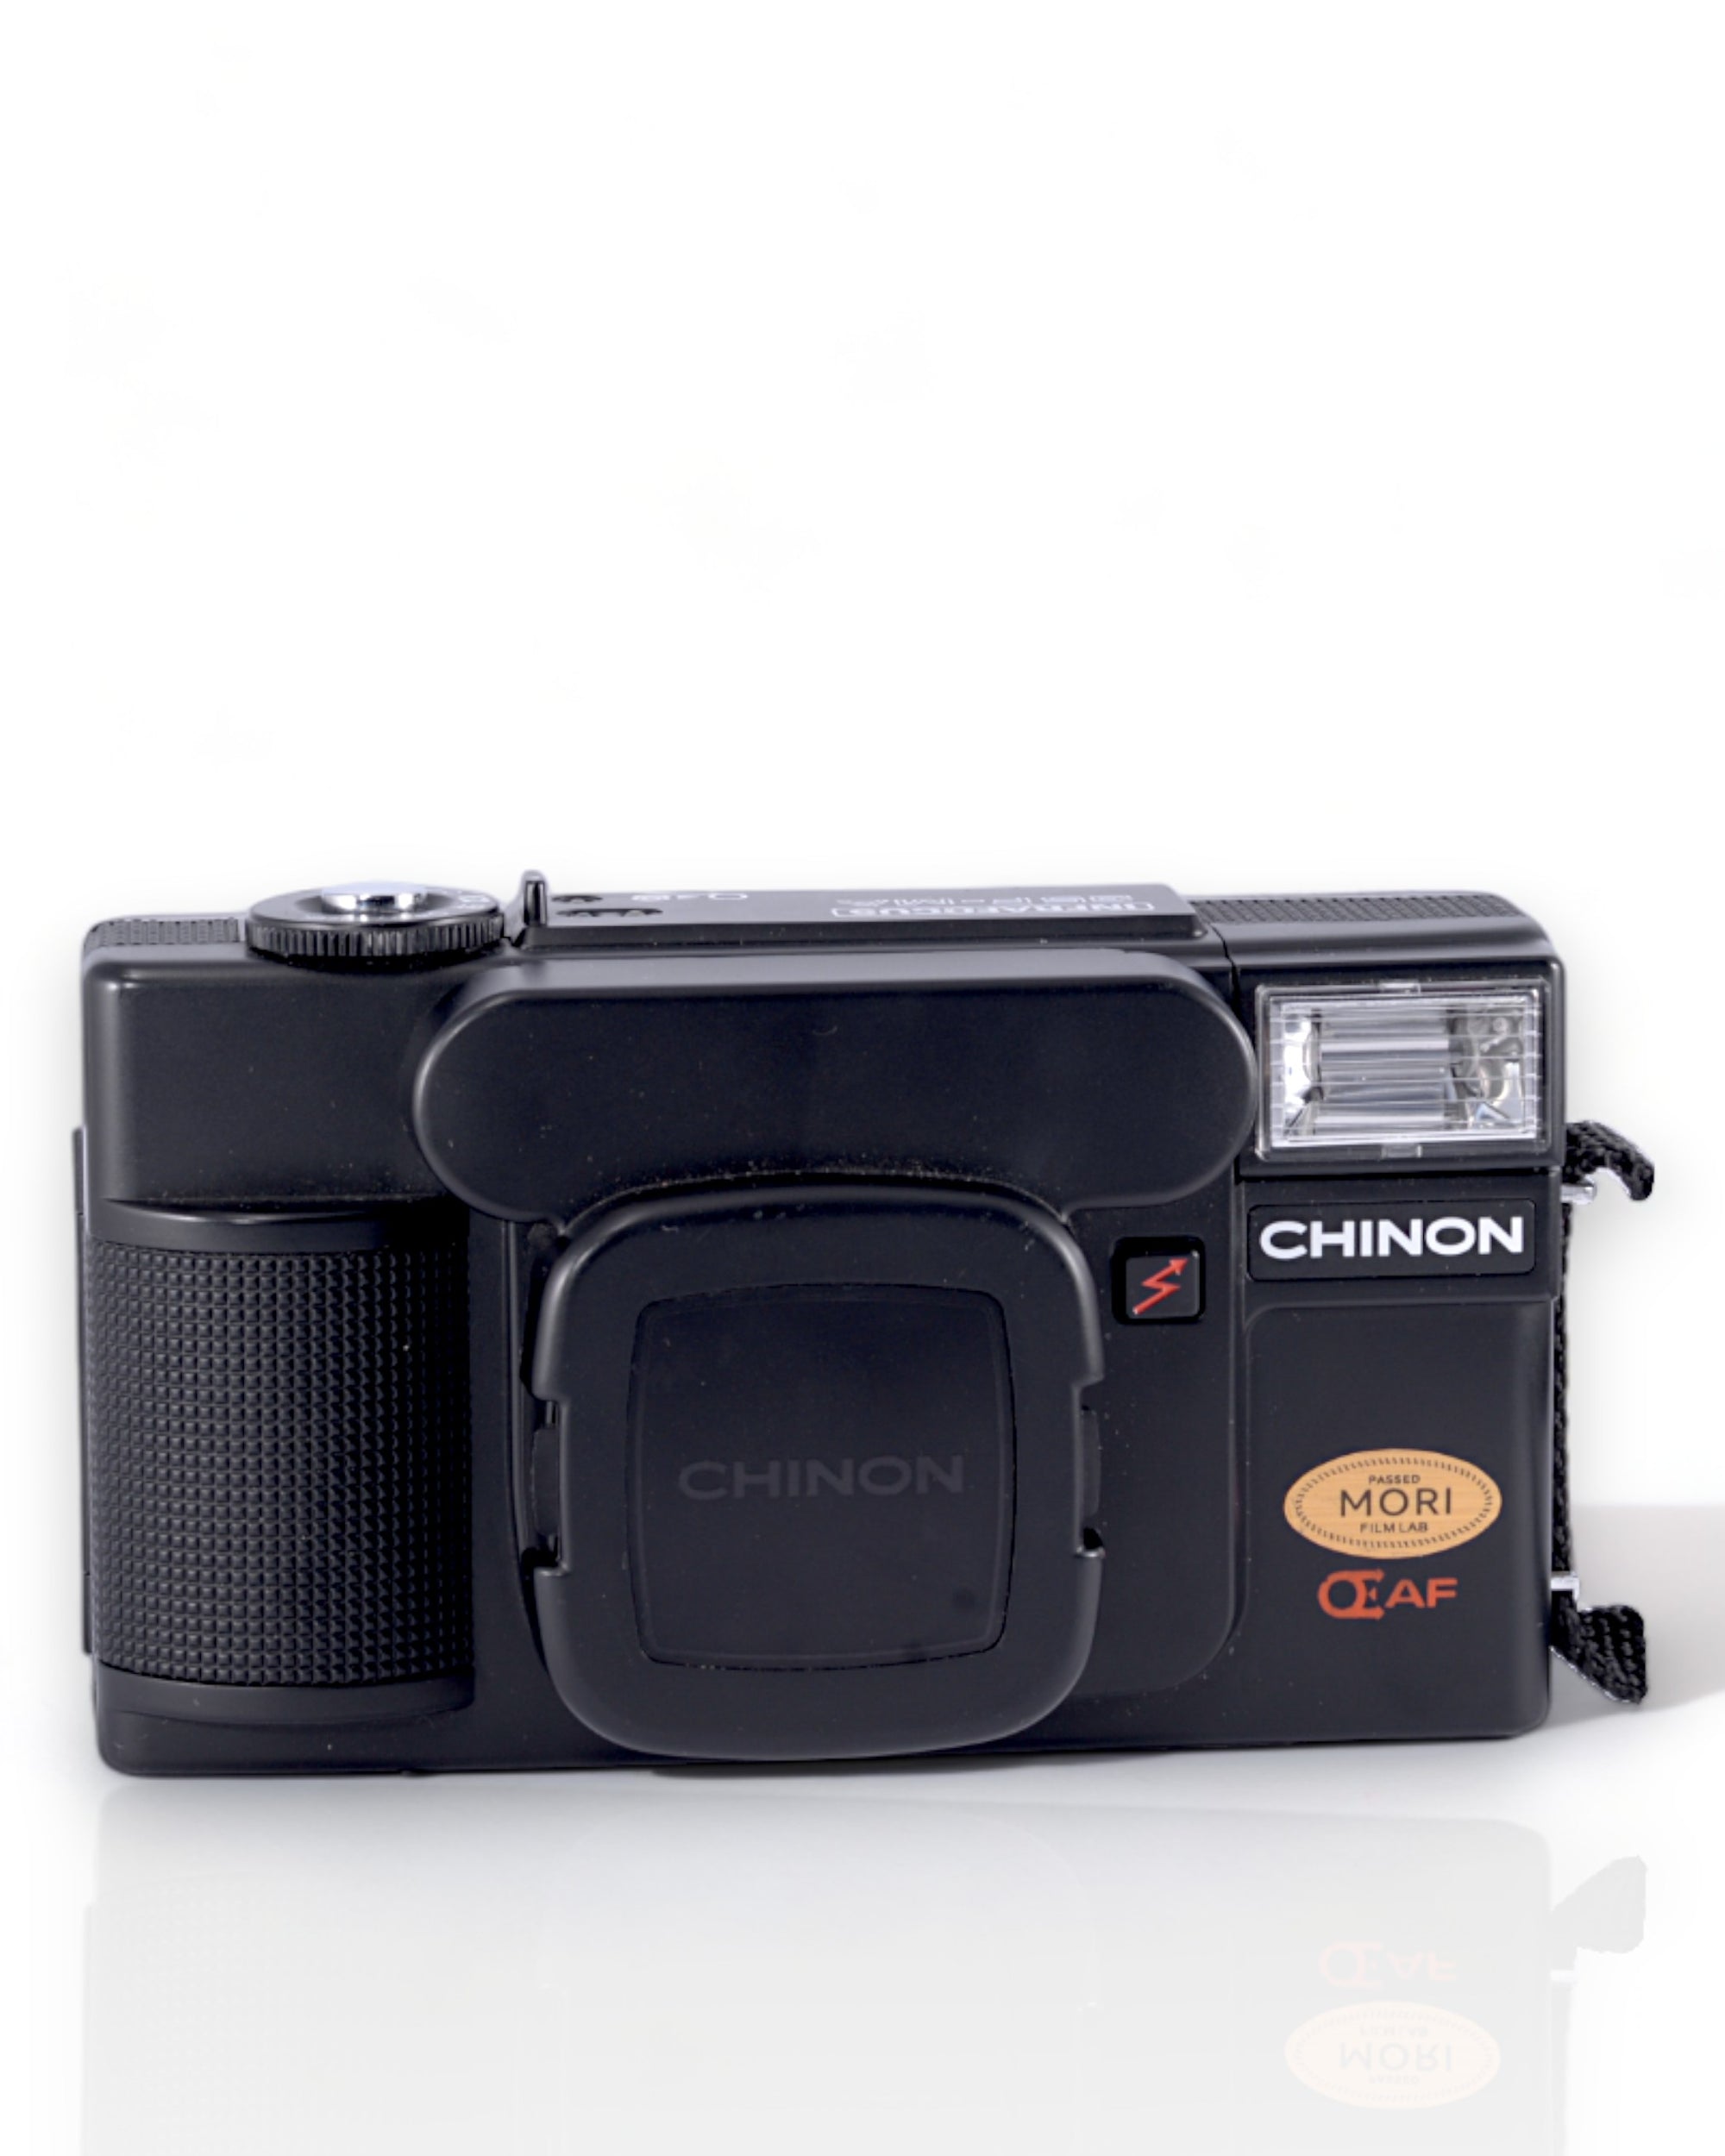 Chinon 35F-MA 35mm point & shoot film camera with 38mm f2.8 lens